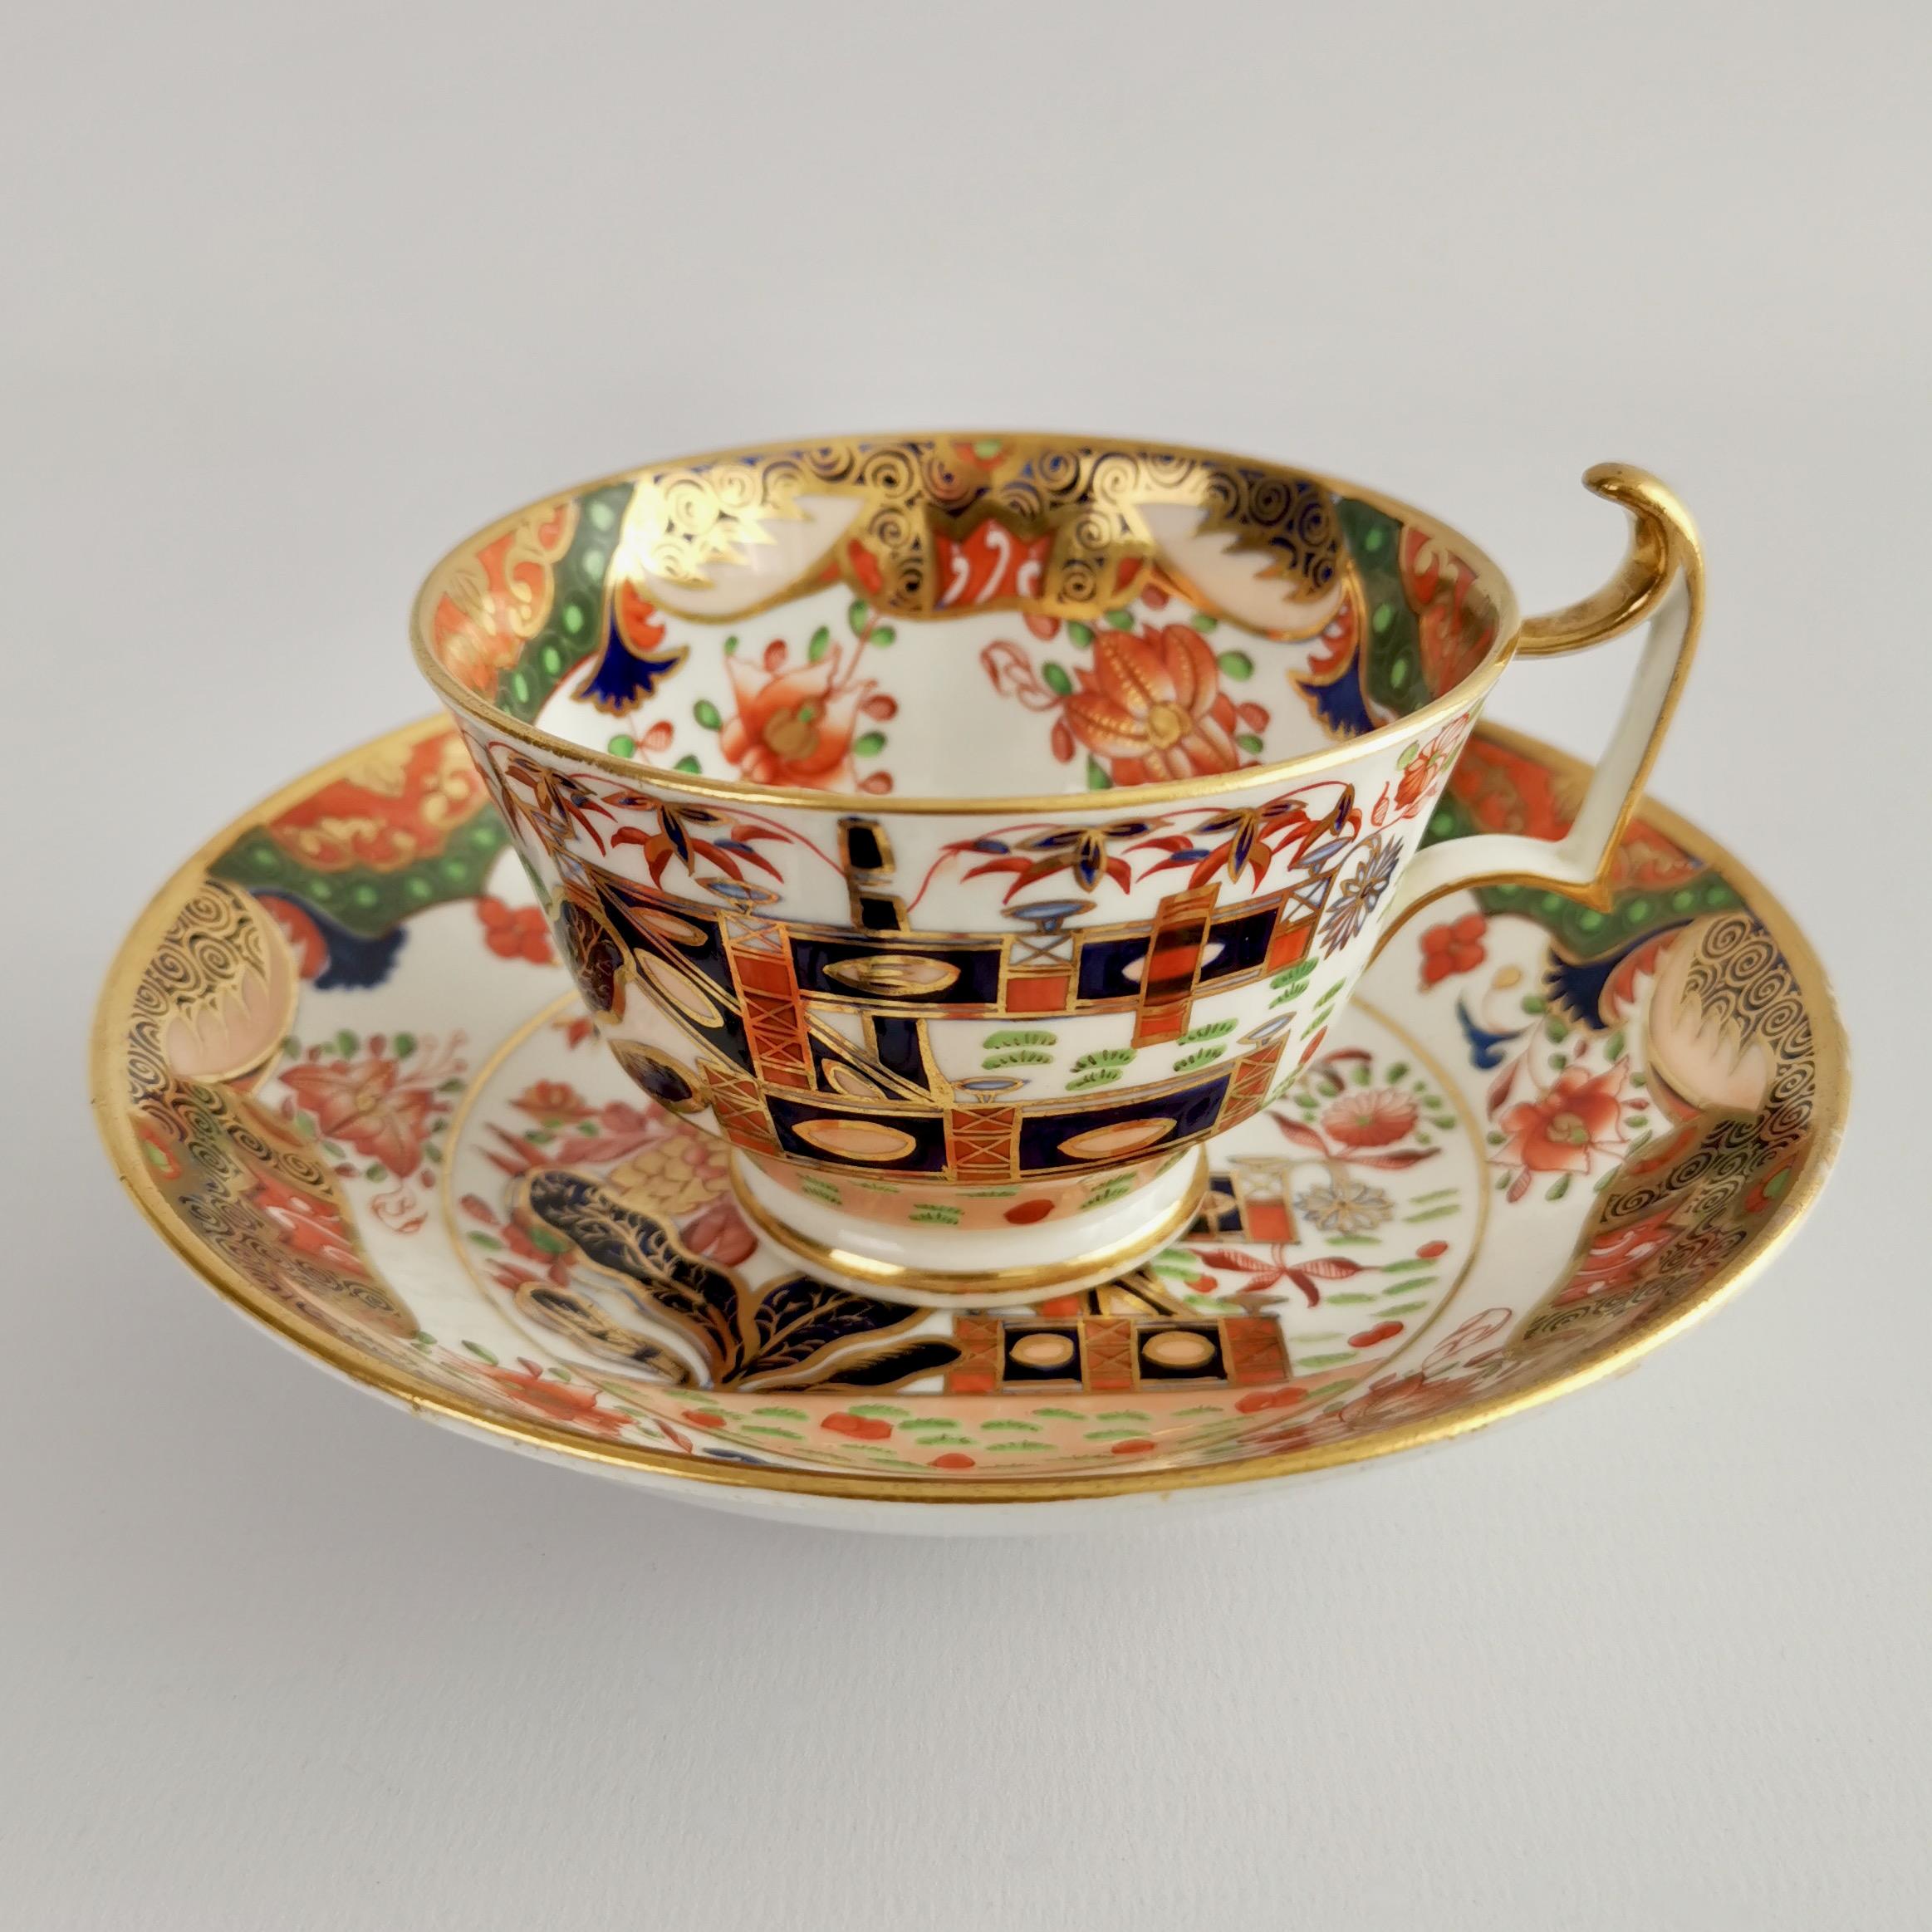 This is a beautiful true trio made by Spode around 1815. The set is decorated in the famous Imari Tobacco Leaf pattern 967. In the early 19th Century, cups and saucers were sold as 